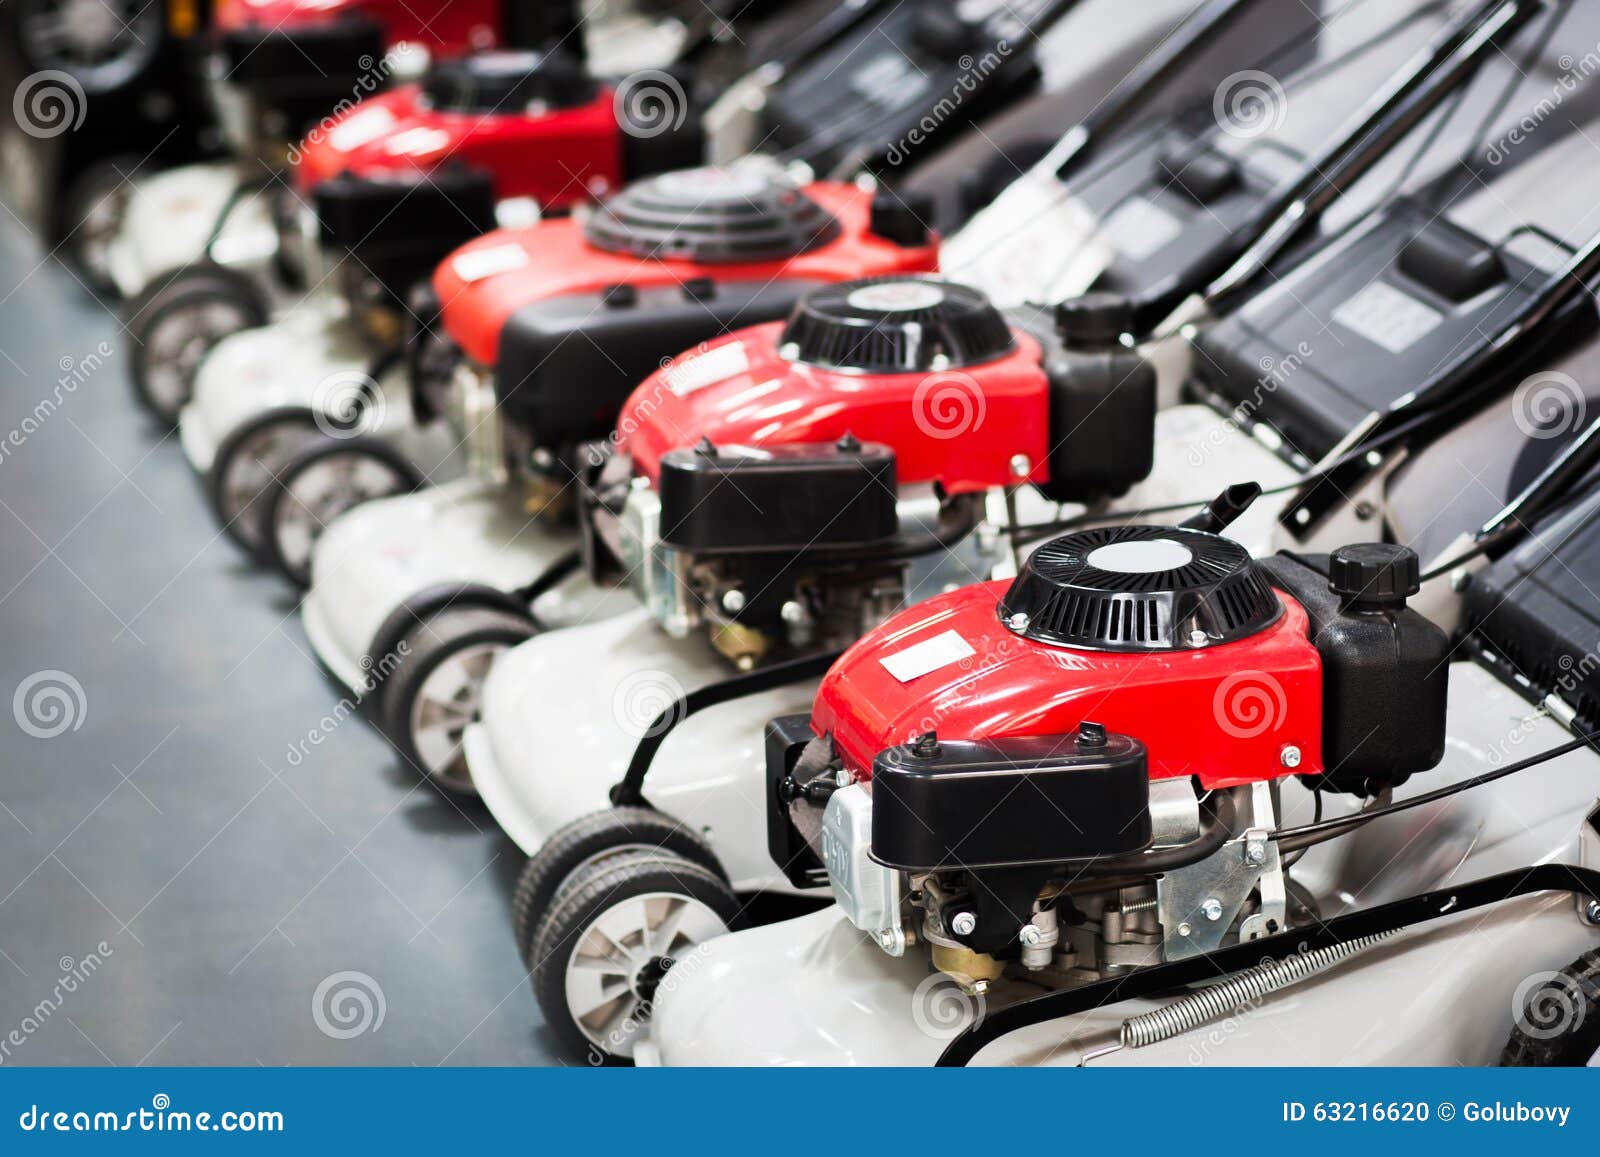 Showcase Of The Lawn Mower In Store Stock Photo - Image of powerful